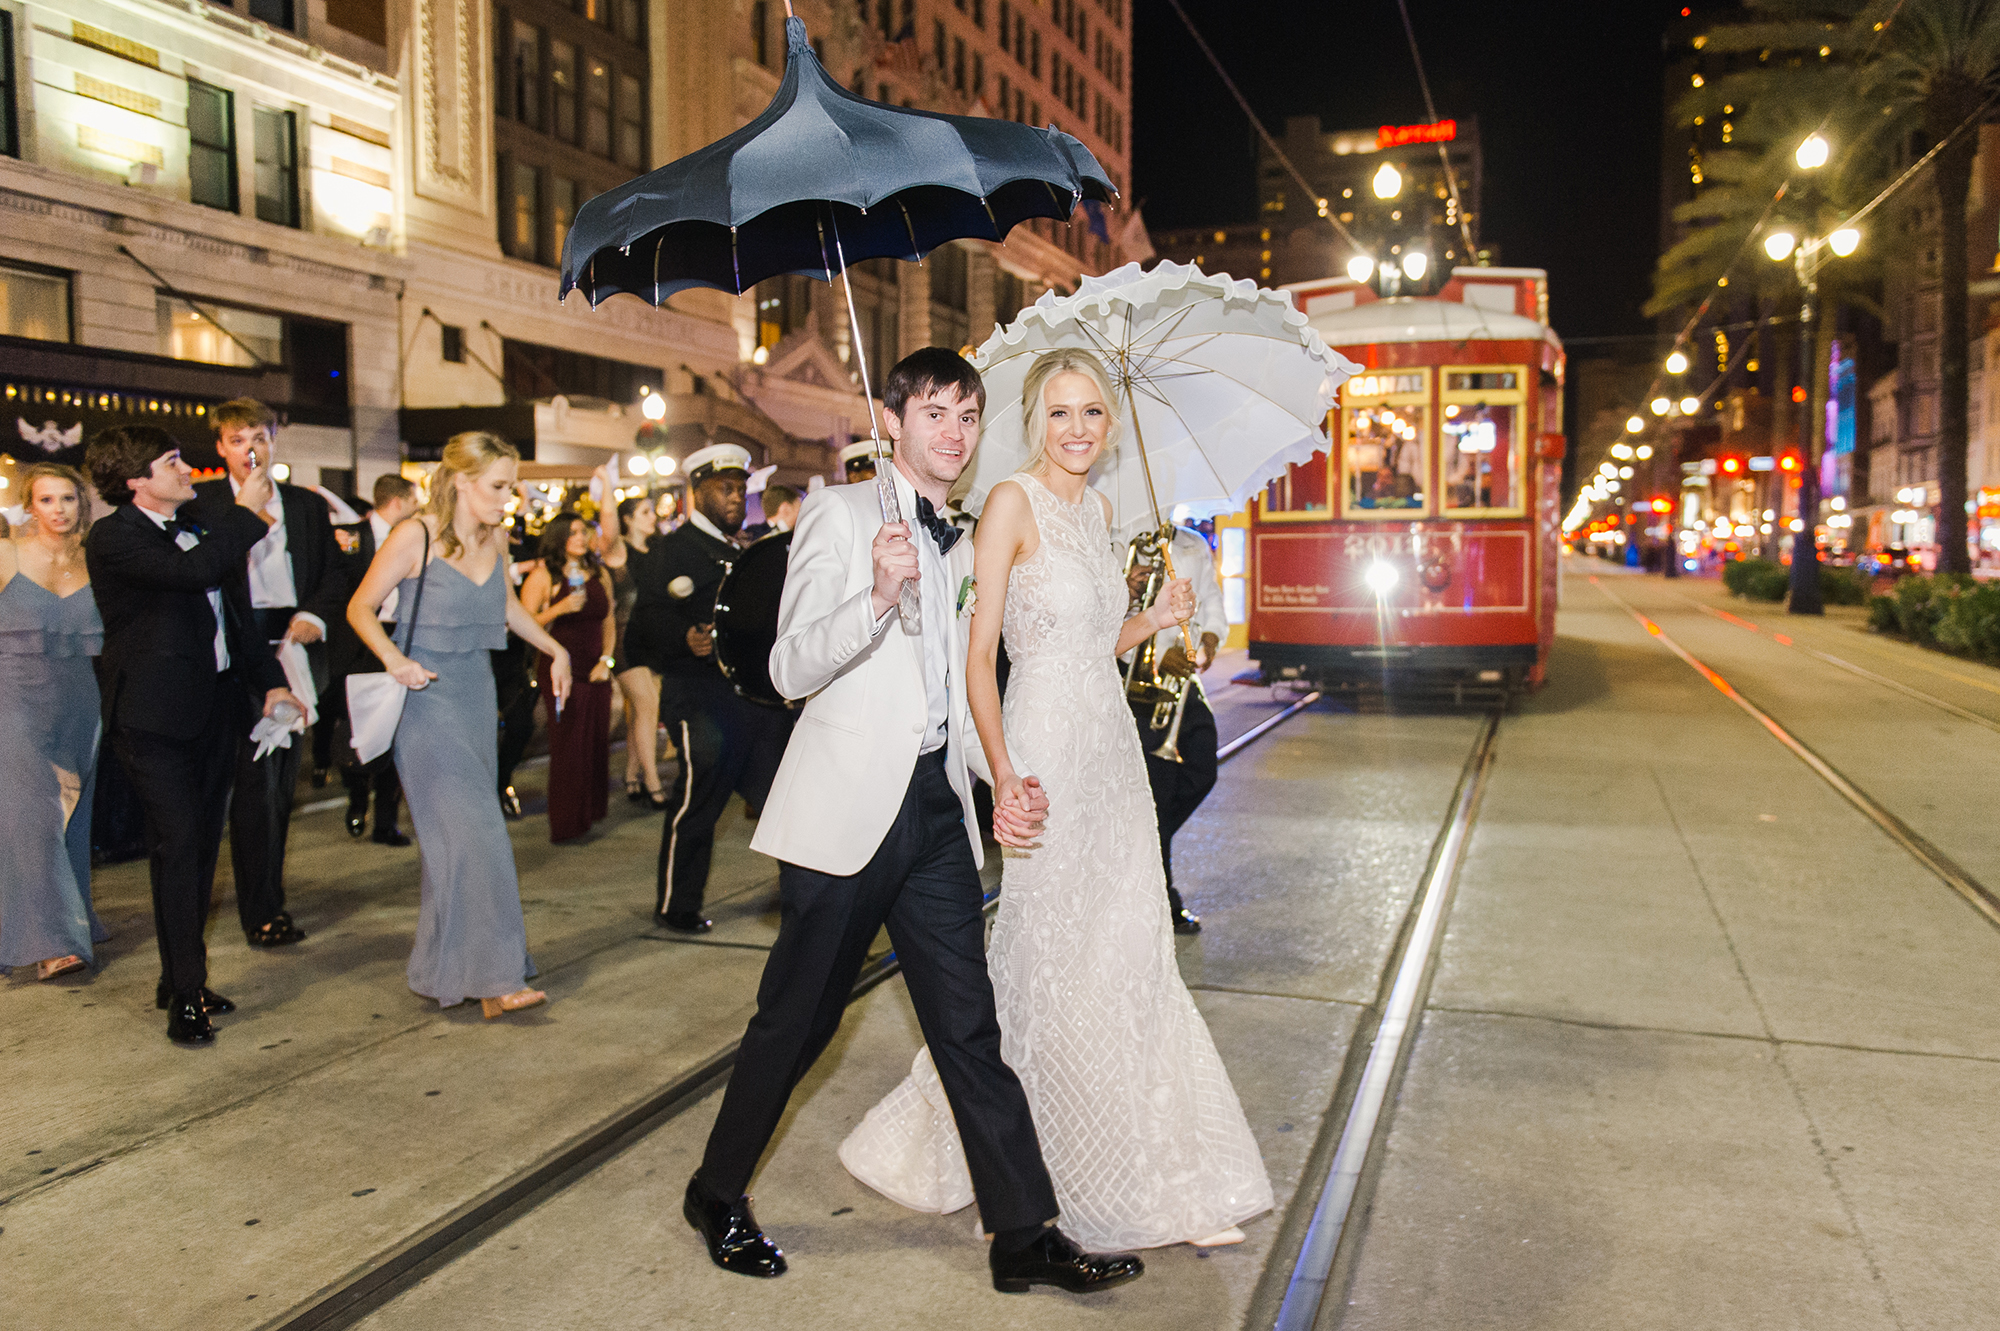 Bride and groom during second line